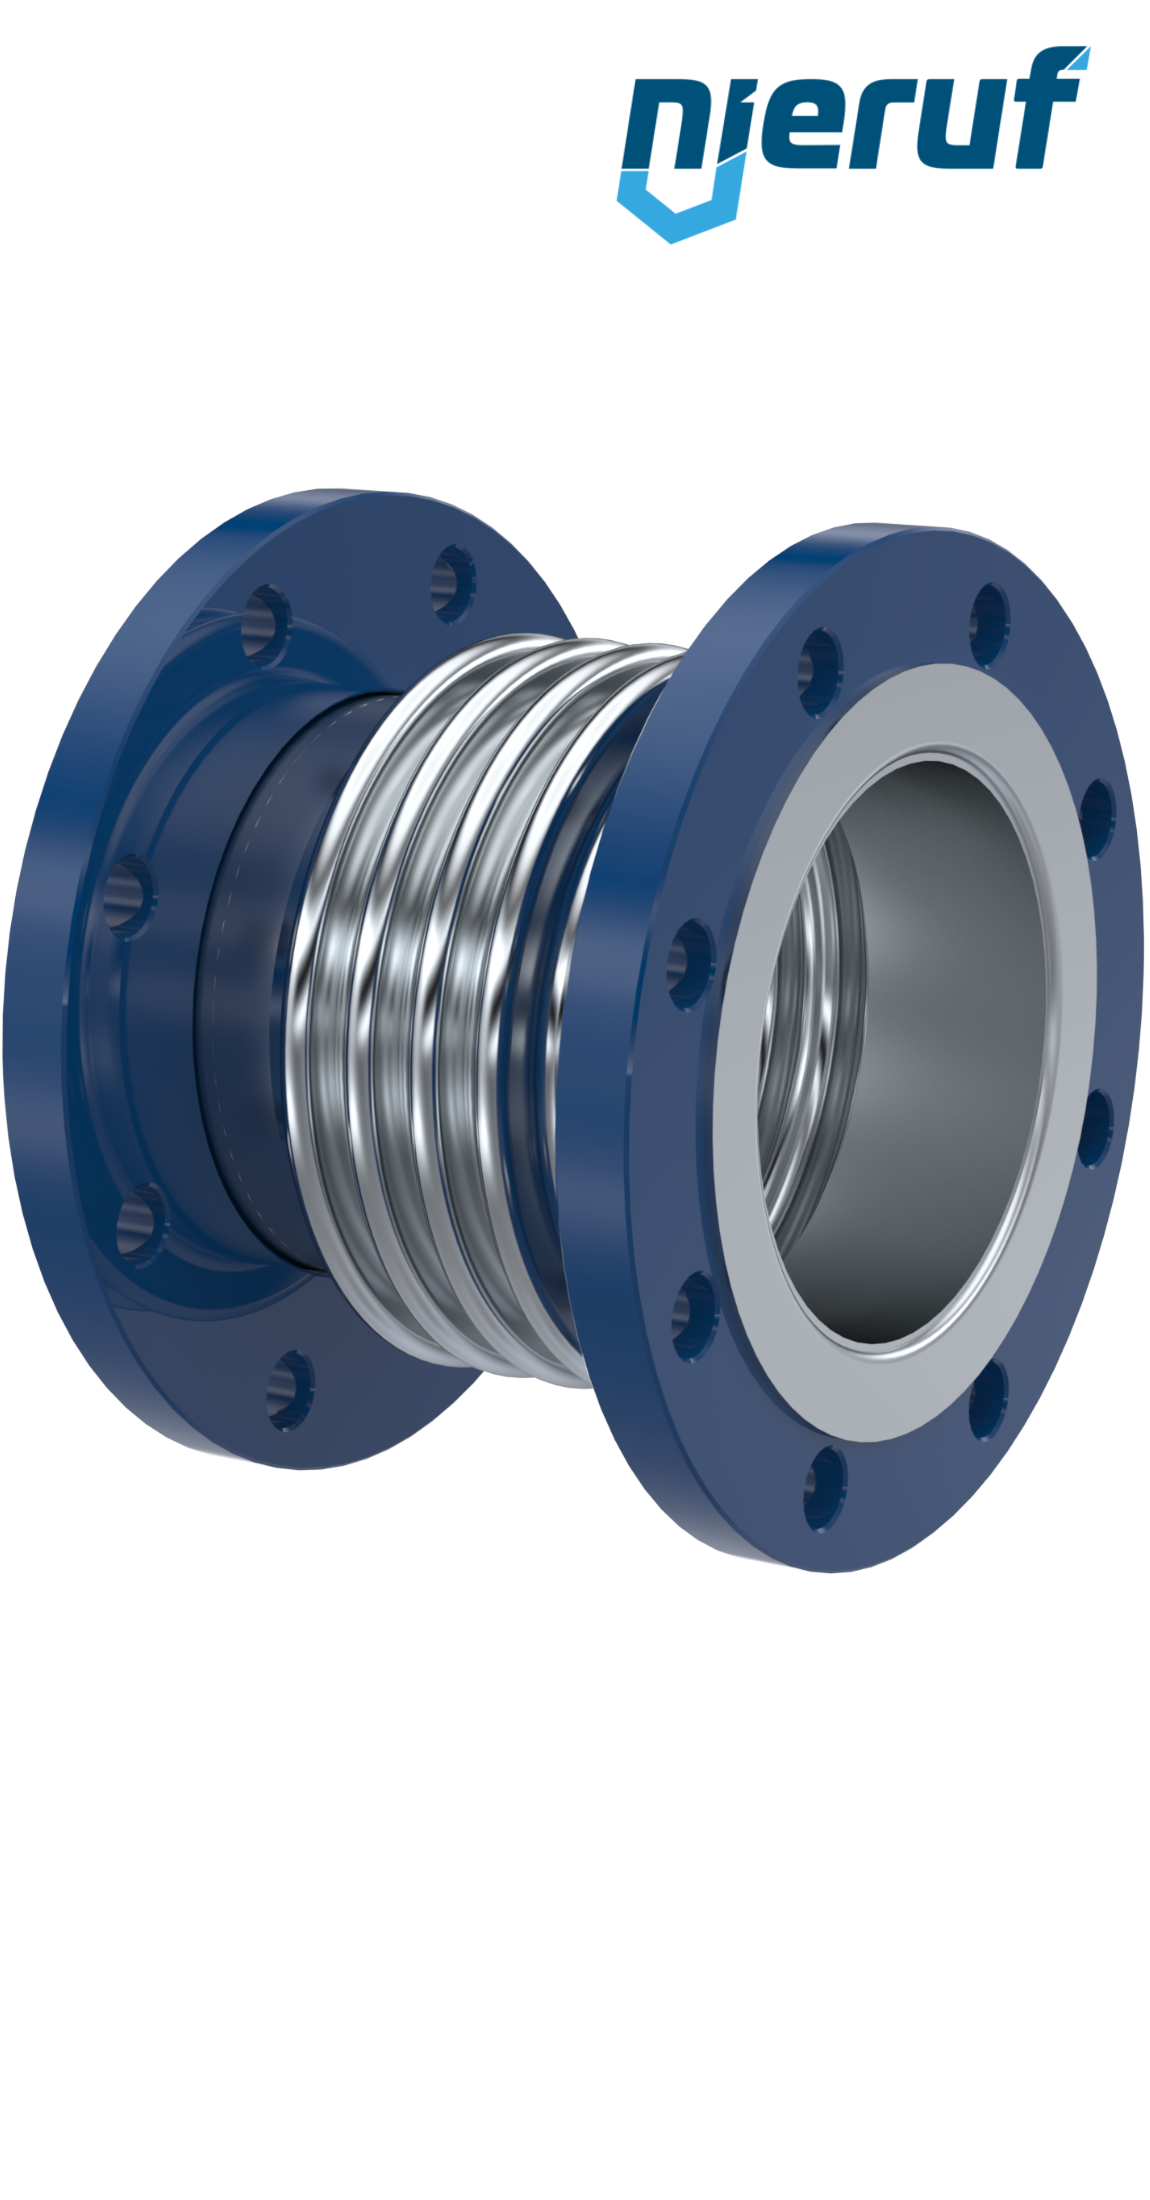 Axial expansion joint DN125 type KP05 flared flanges and stainless steel-bellows